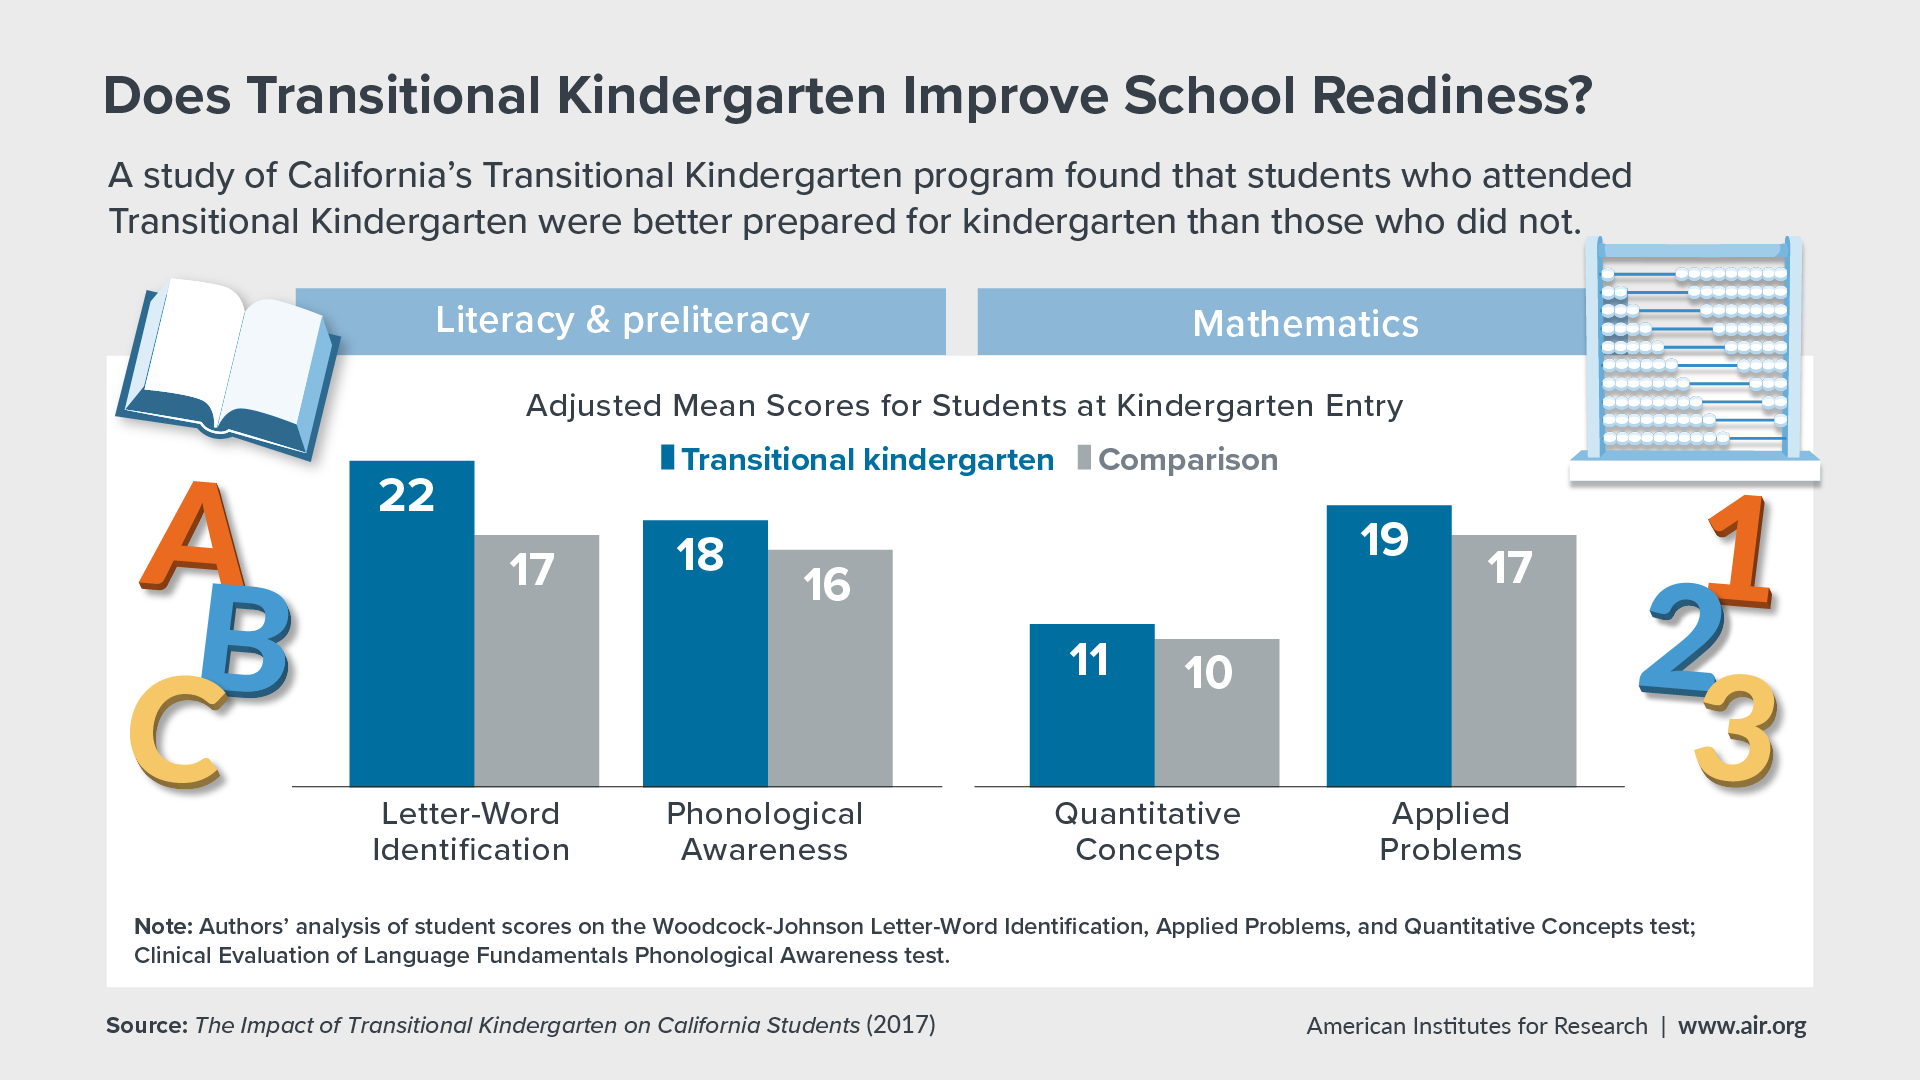 Infographic based on results from a study of California’s Transitional Kindergarten program compares literacy and math scores of students entering kindergarten